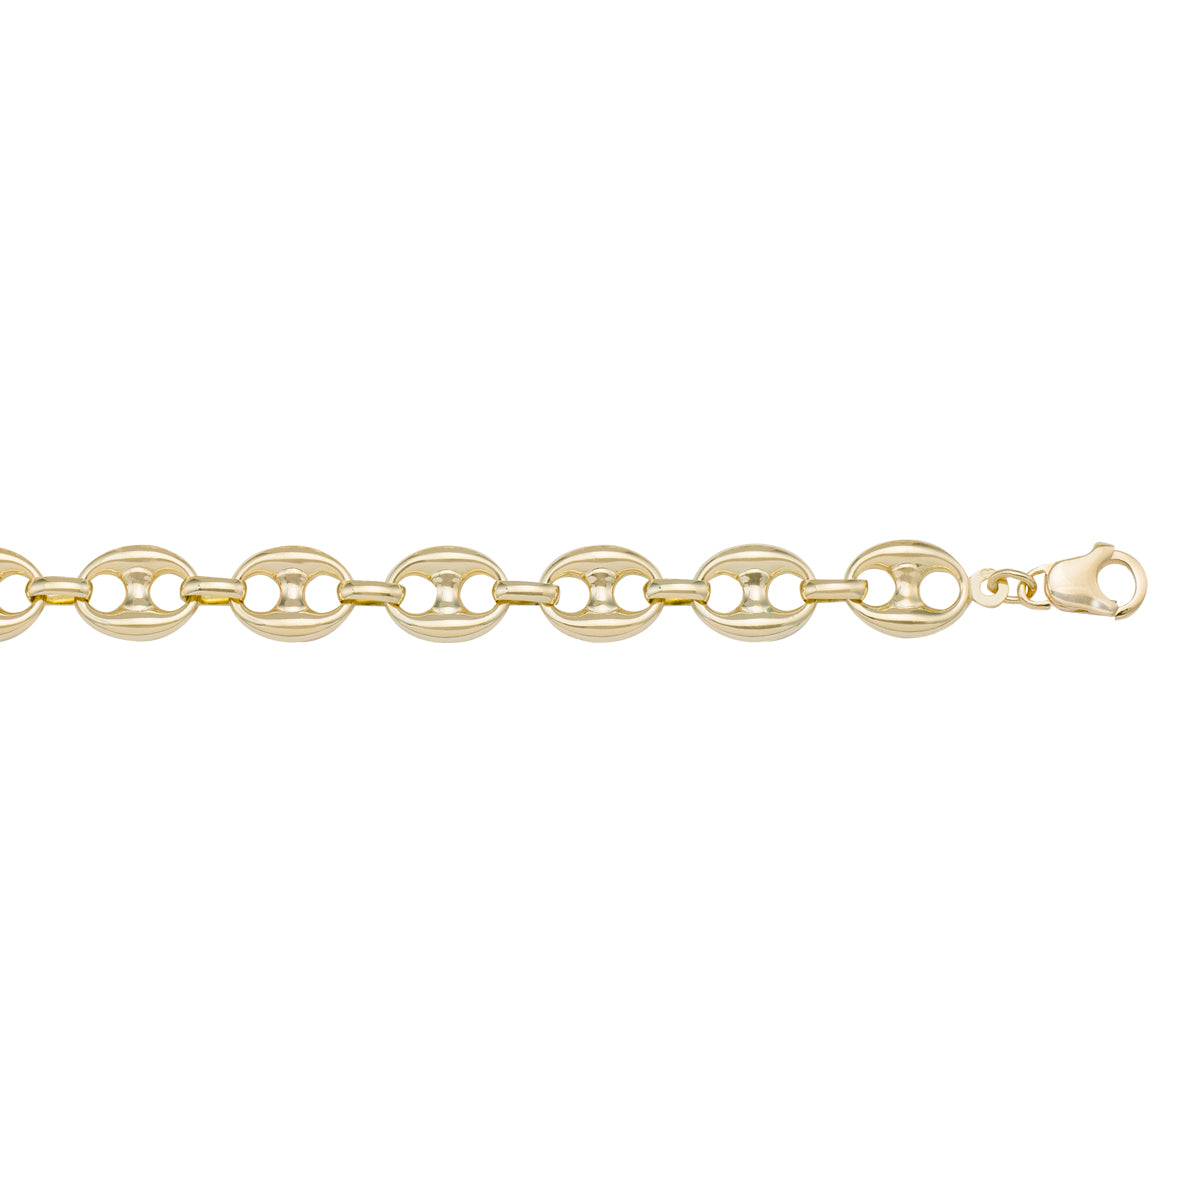 BRACELETS YELLOW GOLD HOLLOW PUFFED ANCHOR LINK CHAIN